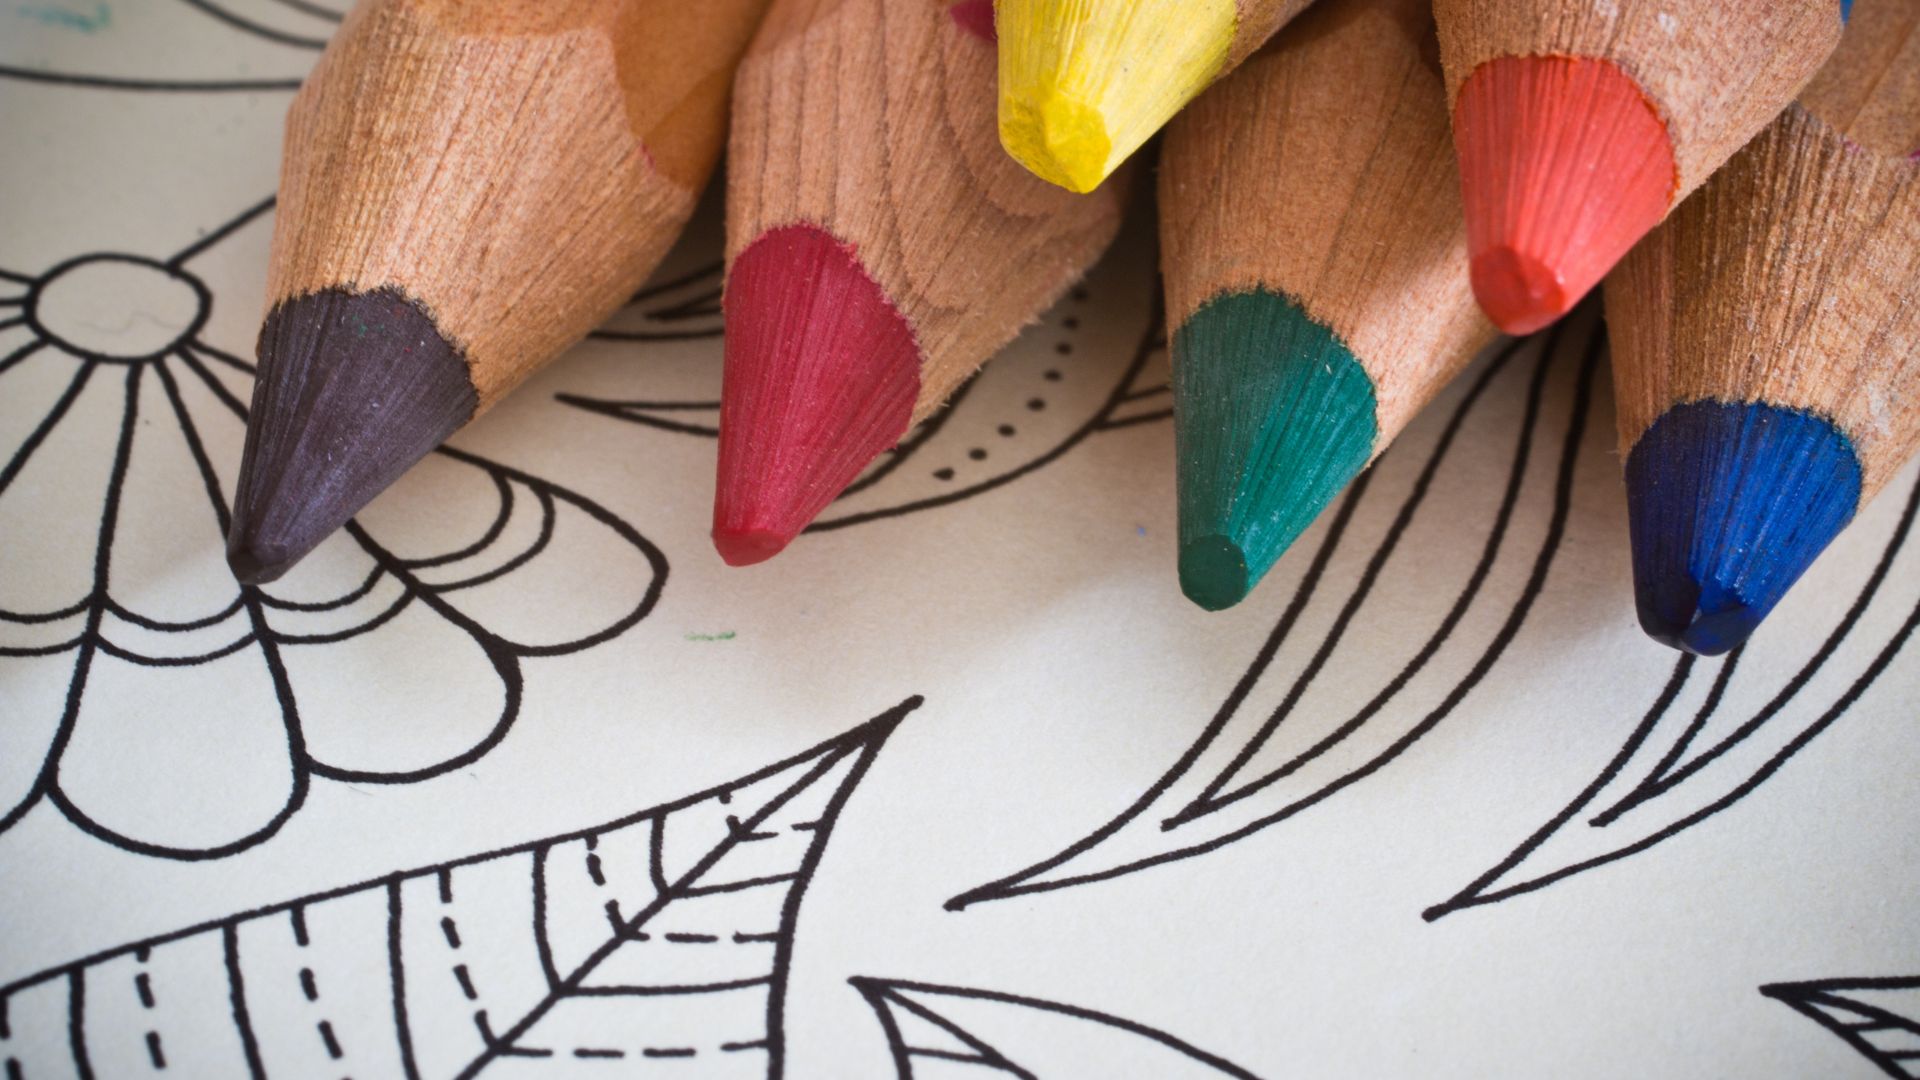 Coloring pages and coloring pencils